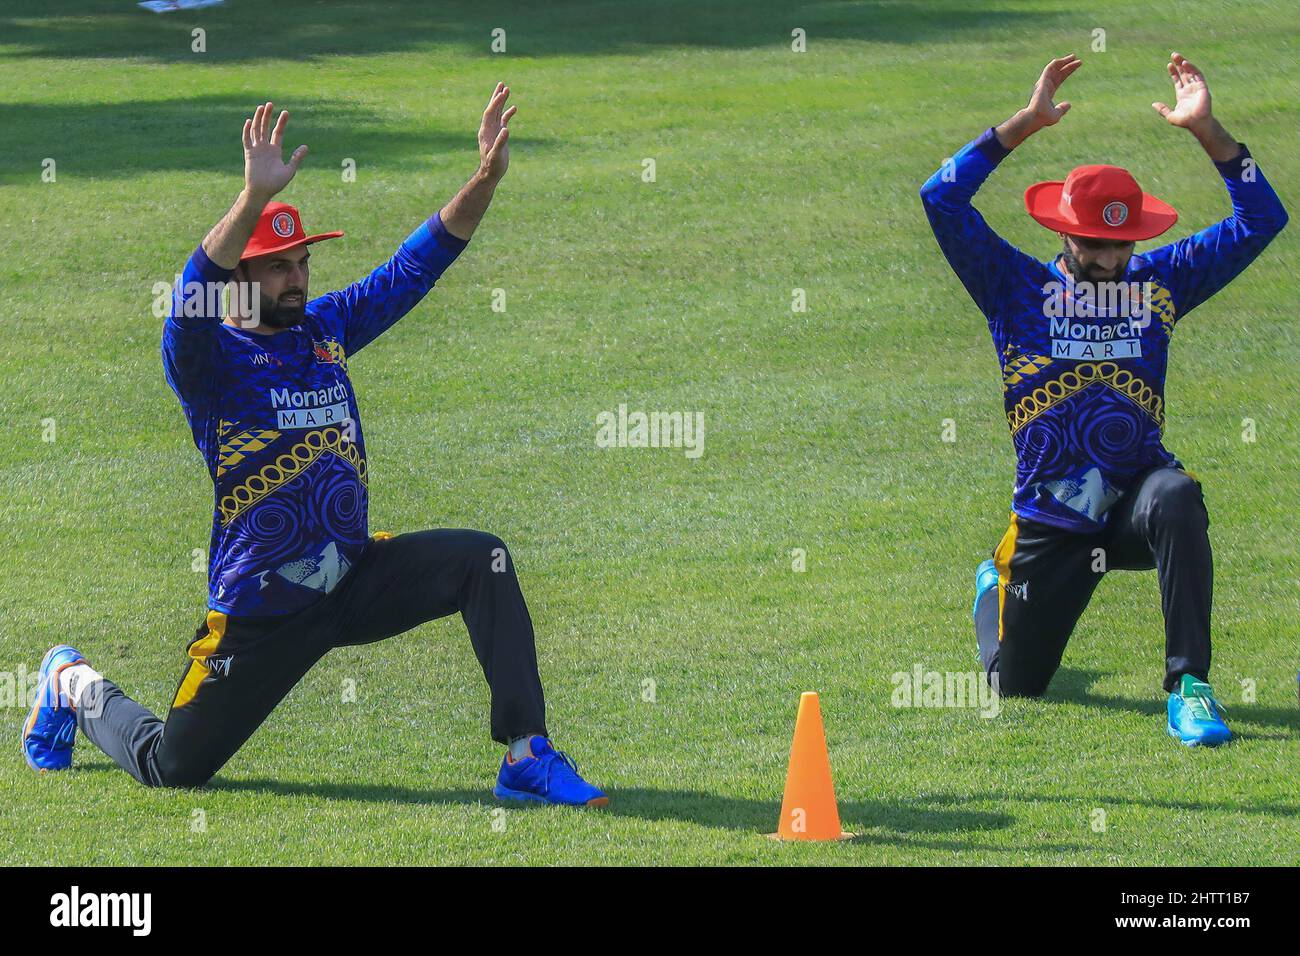 Afghanistan National Cricket Team Player, Mohammad Nabi (L) seen during the practice session ahead of the T20 Series against Bangladesh at Sher-e-Bangla National Cricket Stadium. (Photo by Md Manik / SOPA Images/Sipa USA) Stock Photo